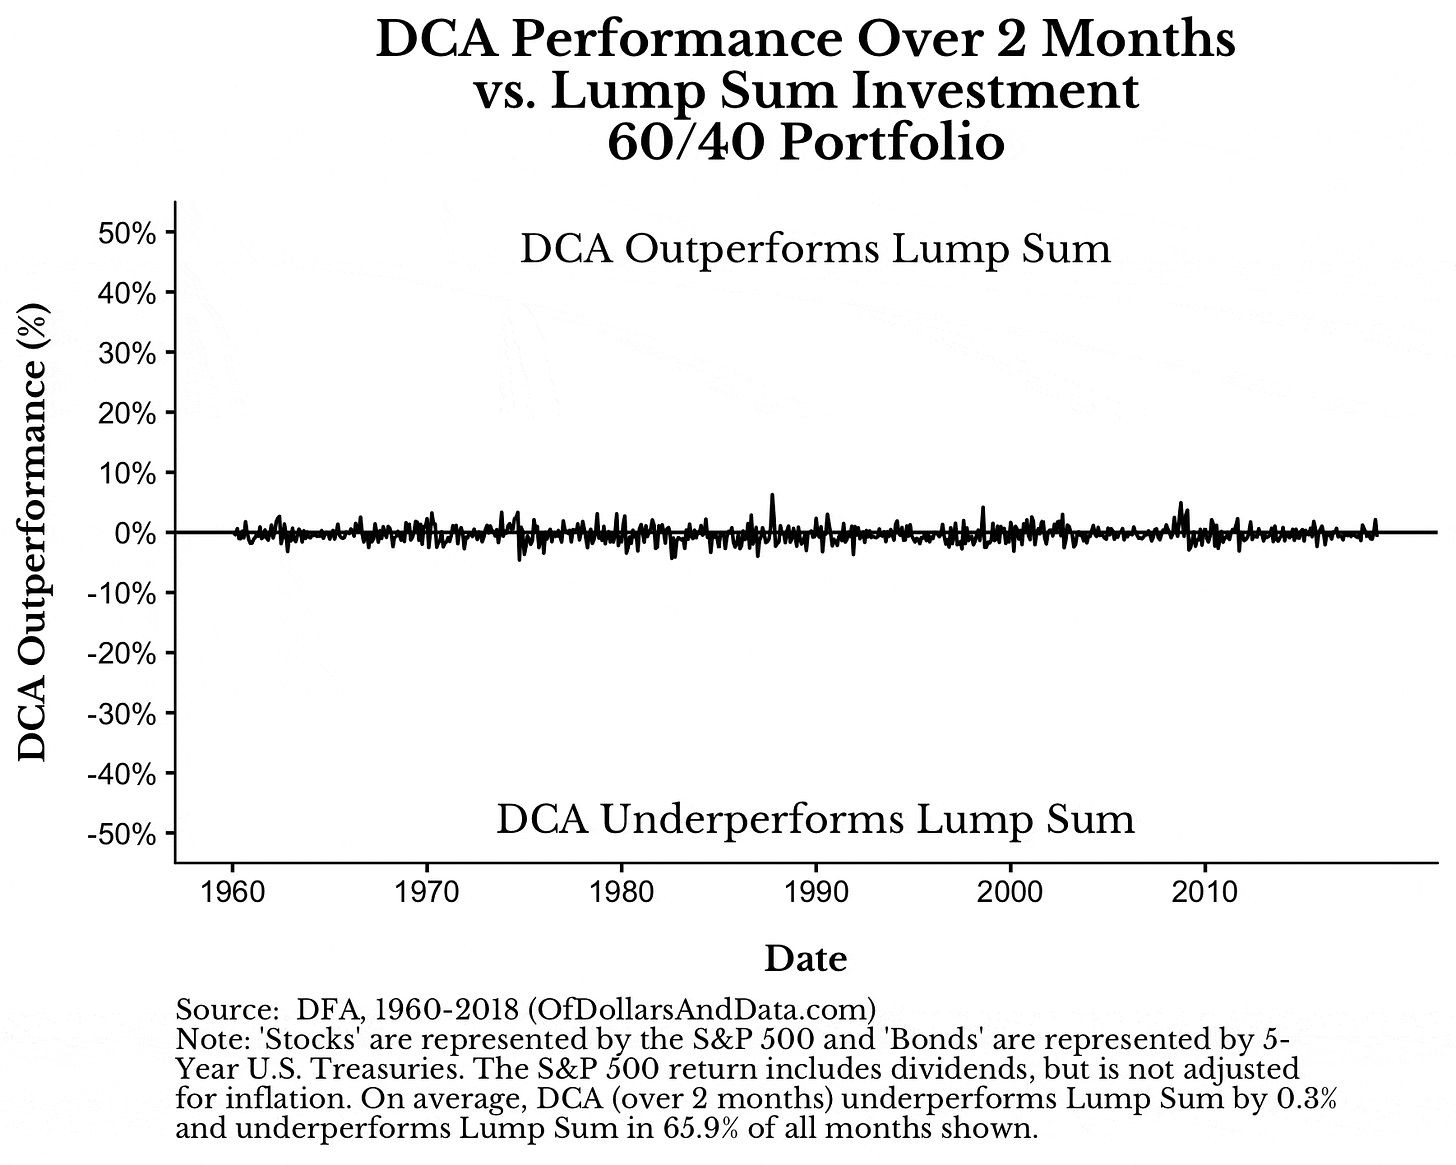 lump sum vs dollar cost averaging outperformance over time for varying time windows